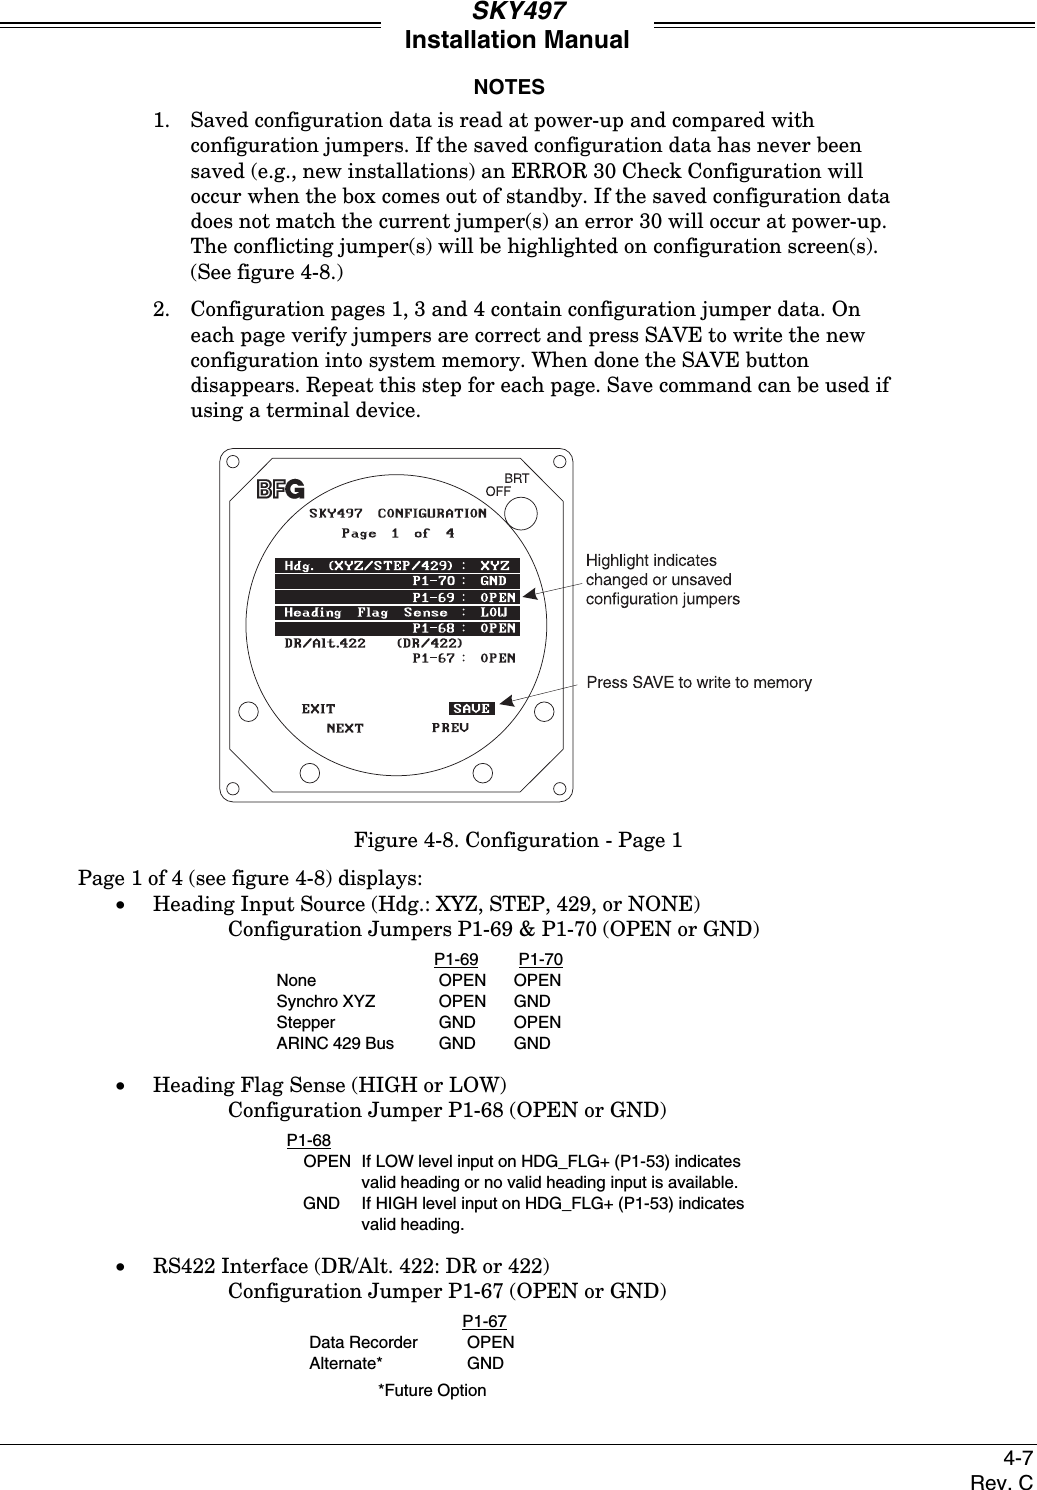 SKY497Installation Manual4-7Rev. CNOTES1. Saved configuration data is read at power-up and compared withconfiguration jumpers. If the saved configuration data has never beensaved (e.g., new installations) an ERROR 30 Check Configuration willoccur when the box comes out of standby. If the saved configuration datadoes not match the current jumper(s) an error 30 will occur at power-up.The conflicting jumper(s) will be highlighted on configuration screen(s).(See figure 4-8.)2. Configuration pages 1, 3 and 4 contain configuration jumper data. Oneach page verify jumpers are correct and press SAVE to write the newconfiguration into system memory. When done the SAVE buttondisappears. Repeat this step for each page. Save command can be used ifusing a terminal device.Figure 4-8. Configuration - Page 1Page 1 of 4 (see figure 4-8) displays:• Heading Input Source (Hdg.: XYZ, STEP, 429, or NONE)Configuration Jumpers P1-69 &amp; P1-70 (OPEN or GND)P1-69 P1-70None OPEN OPENSynchro XYZ OPEN GND Stepper GND OPENARINC 429 Bus GND GND• Heading Flag Sense (HIGH or LOW)Configuration Jumper P1-68 (OPEN or GND)P1-68OPEN If LOW level input on HDG_FLG+ (P1-53) indicatesvalid heading or no valid heading input is available.GND If HIGH level input on HDG_FLG+ (P1-53) indicatesvalid heading.• RS422 Interface (DR/Alt. 422: DR or 422)Configuration Jumper P1-67 (OPEN or GND)P1-67Data Recorder OPENAlternate* GND*Future Option